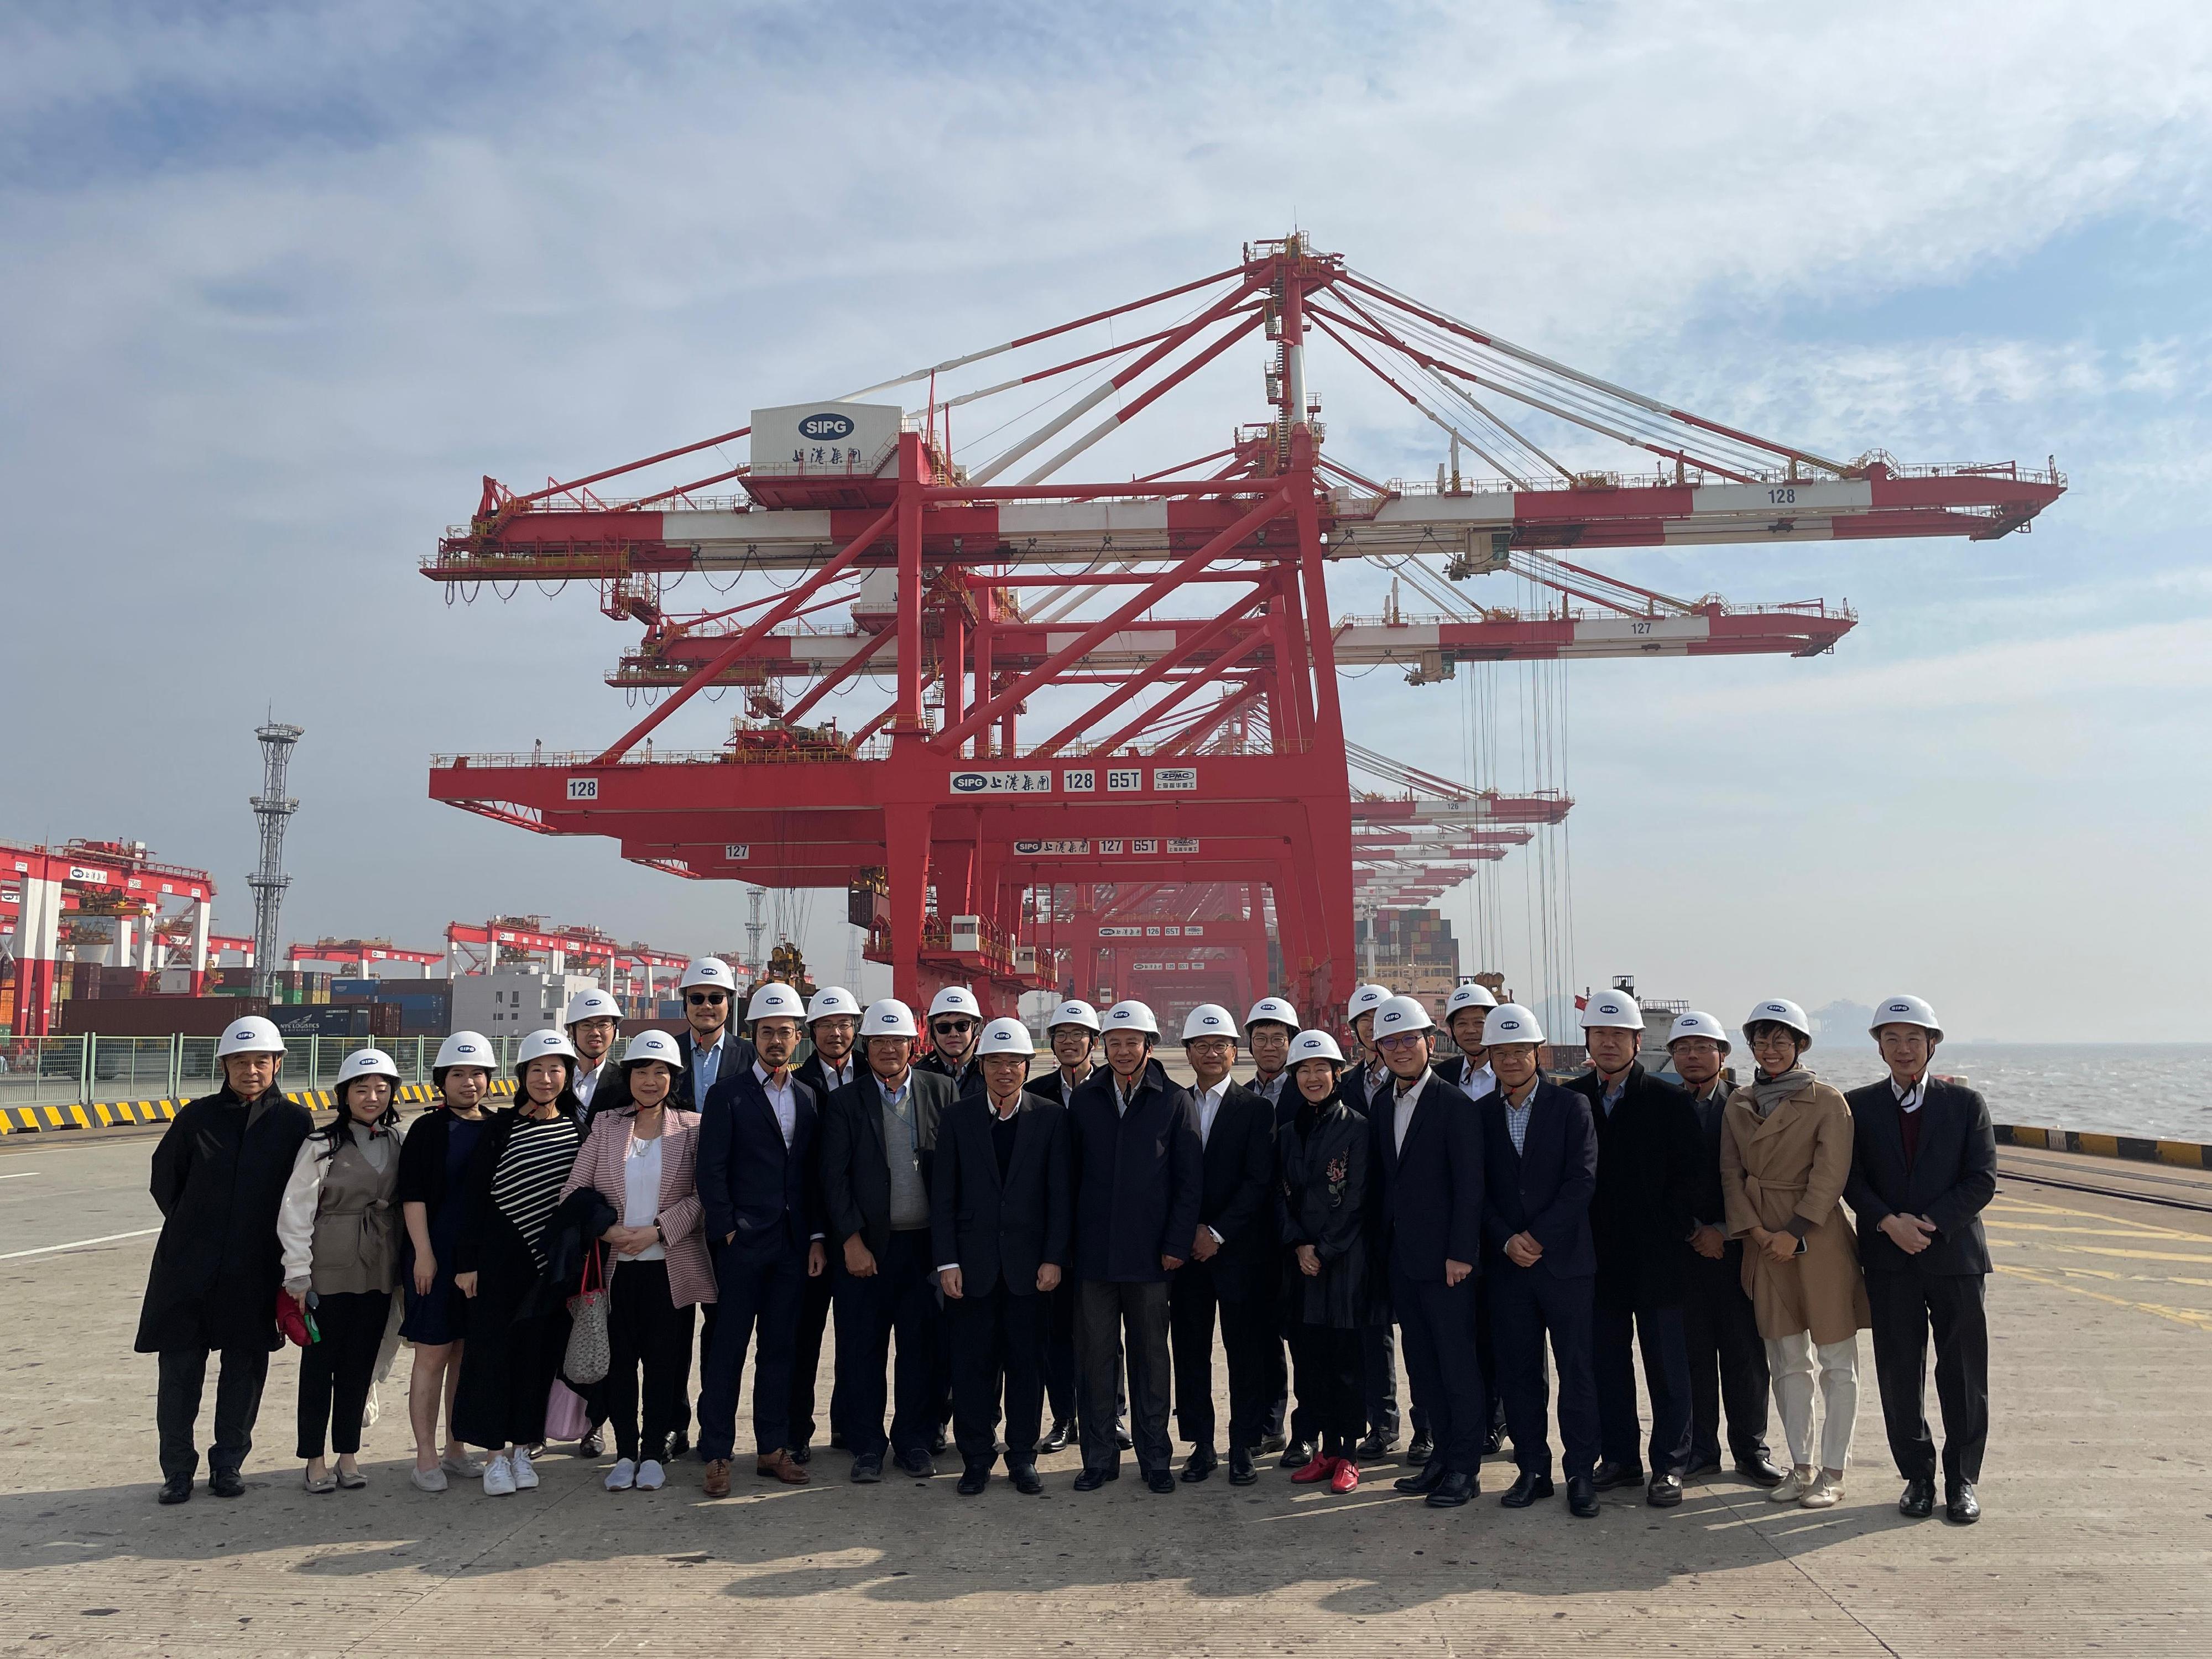 The Secretary for Transport and Logistics, Mr Lam Sai-hung (front row, eighth left), leads members of the Hong Kong Maritime and Port Board to visit the Yangshan Phase IV Automated Terminal in Shanghai today (December 6) to understand more about its operation.